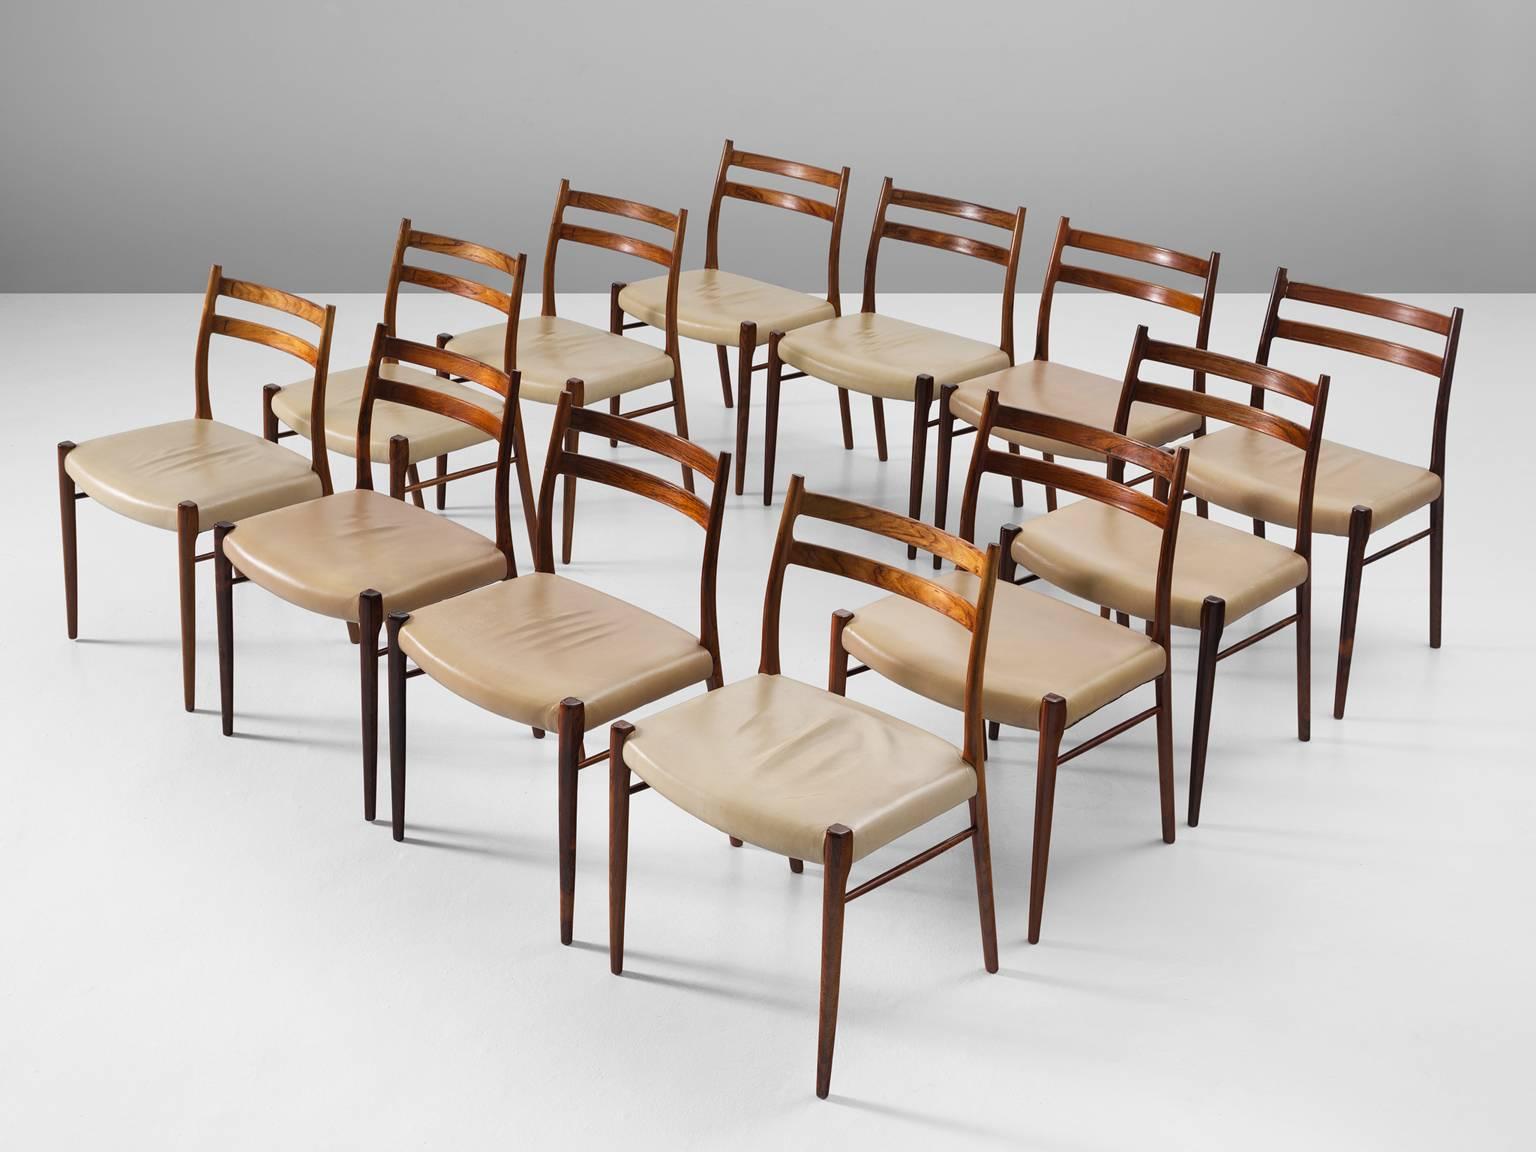 12 chairs model GS710, in rosewood and leather, by Arne Wahl Iversen for Glyngore Stolefabrik, Denmark, 1960s. 

Very elegant set of 12 dining chairs by Danish designer Arne Wahl Iversen. It is highly rare to find a large set of these well